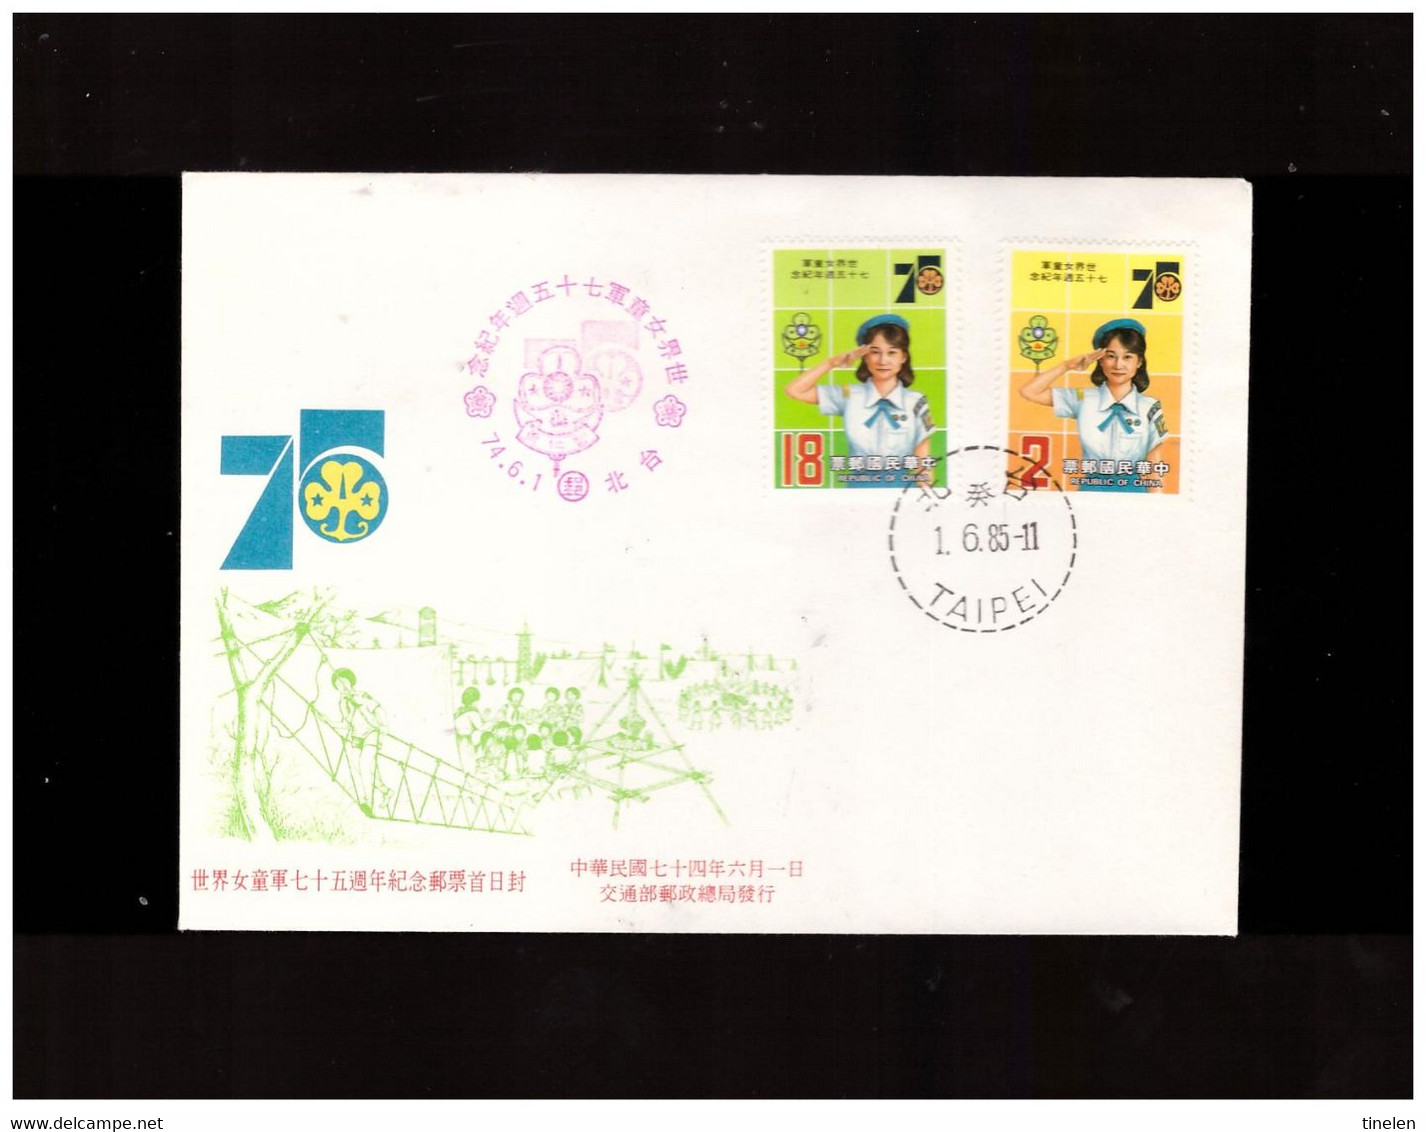 REP. OF CHINA -1 6 1985 FDC GIRL SCOUT - 1980-1989